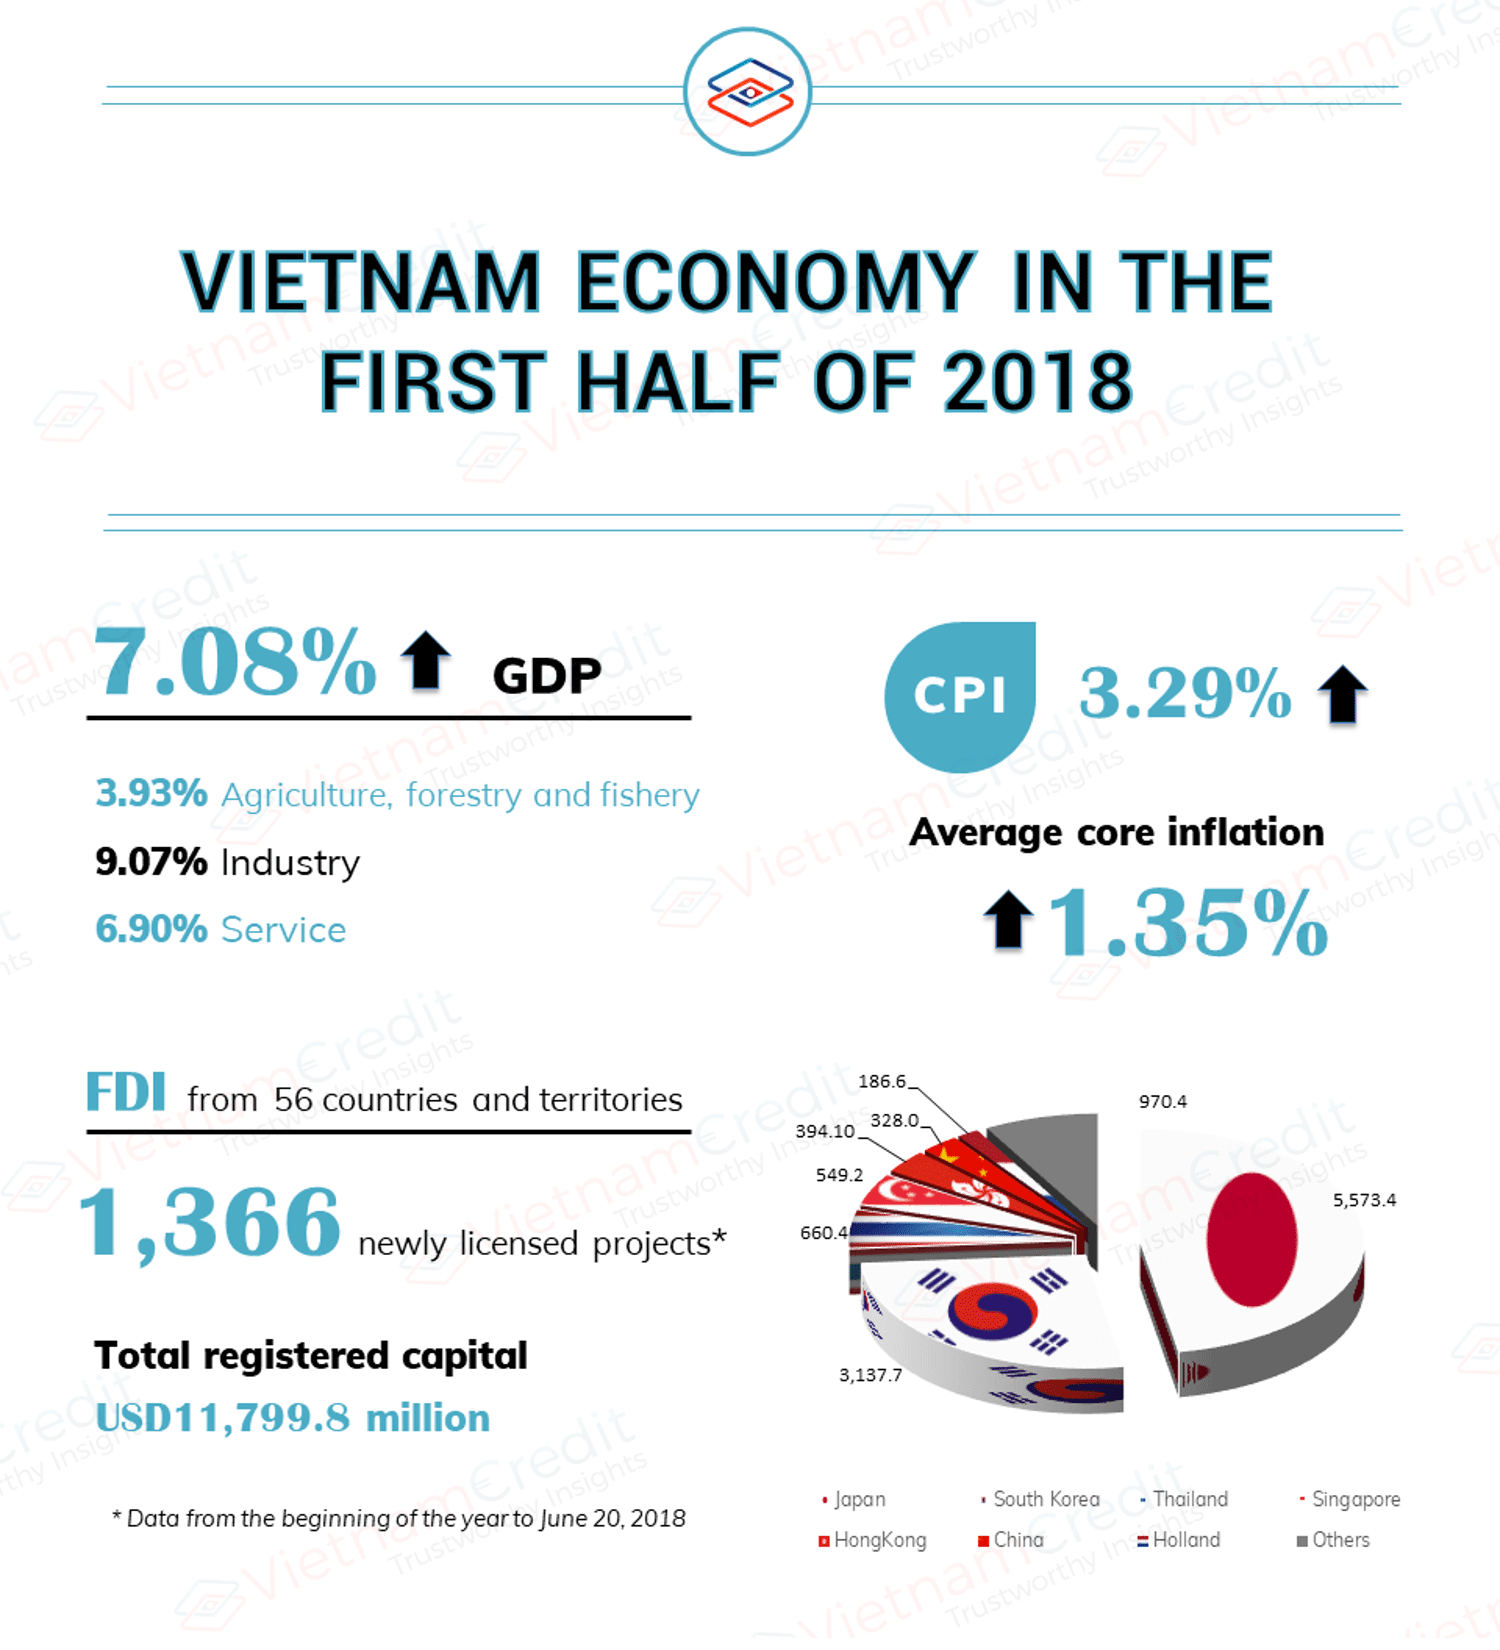 INFOGRAPHIC: VIETNAM ECONOMY IN THE FIRST HALF OF 2018